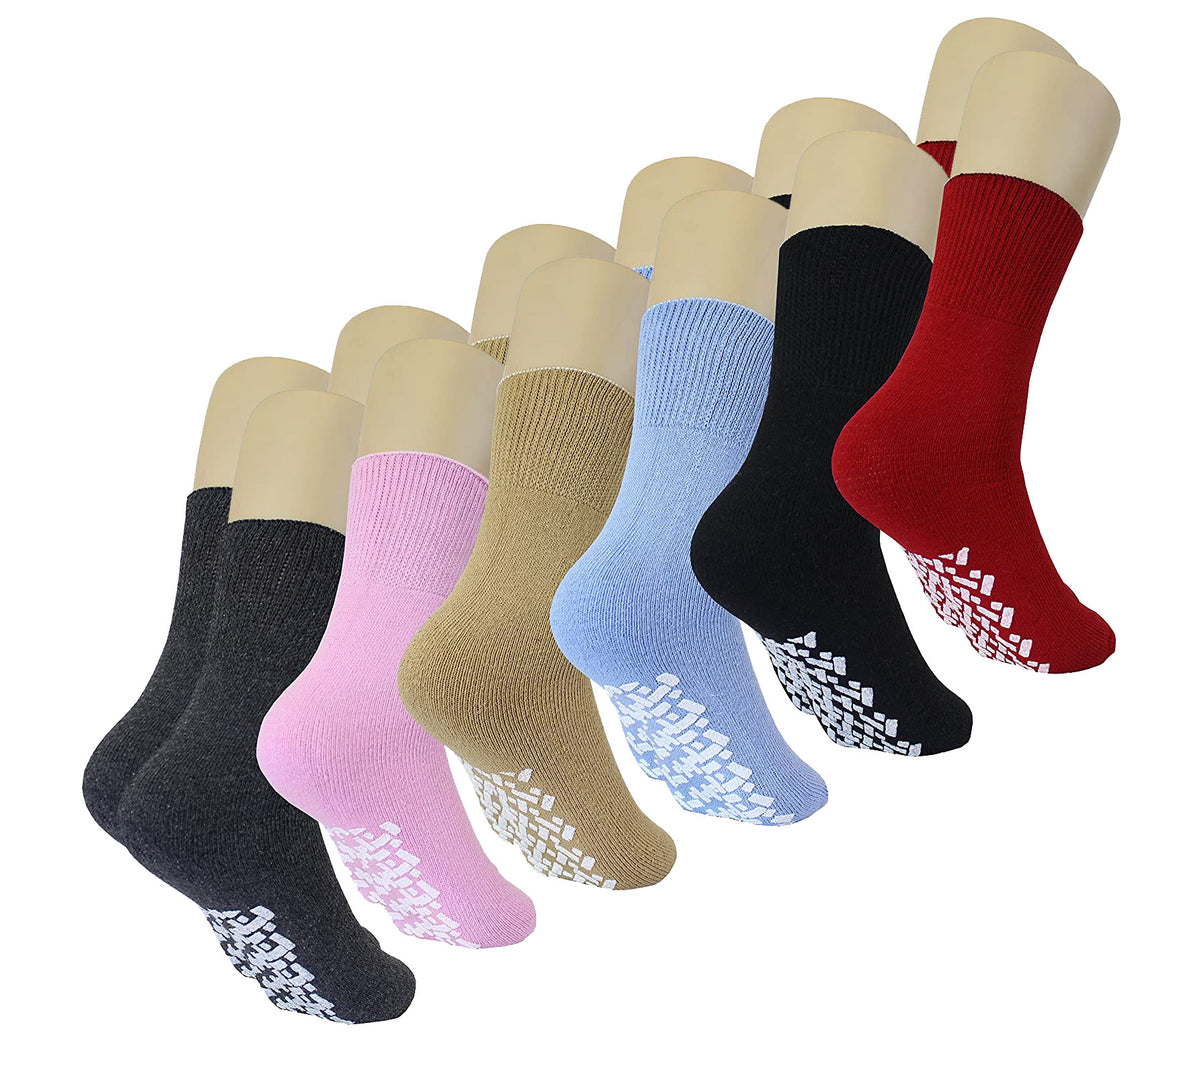  Kilofly Non-Skid Soft Cotton Summer Slippers Gripper Socks  Value Pack, Set5 B, One Size : Clothing, Shoes & Jewelry